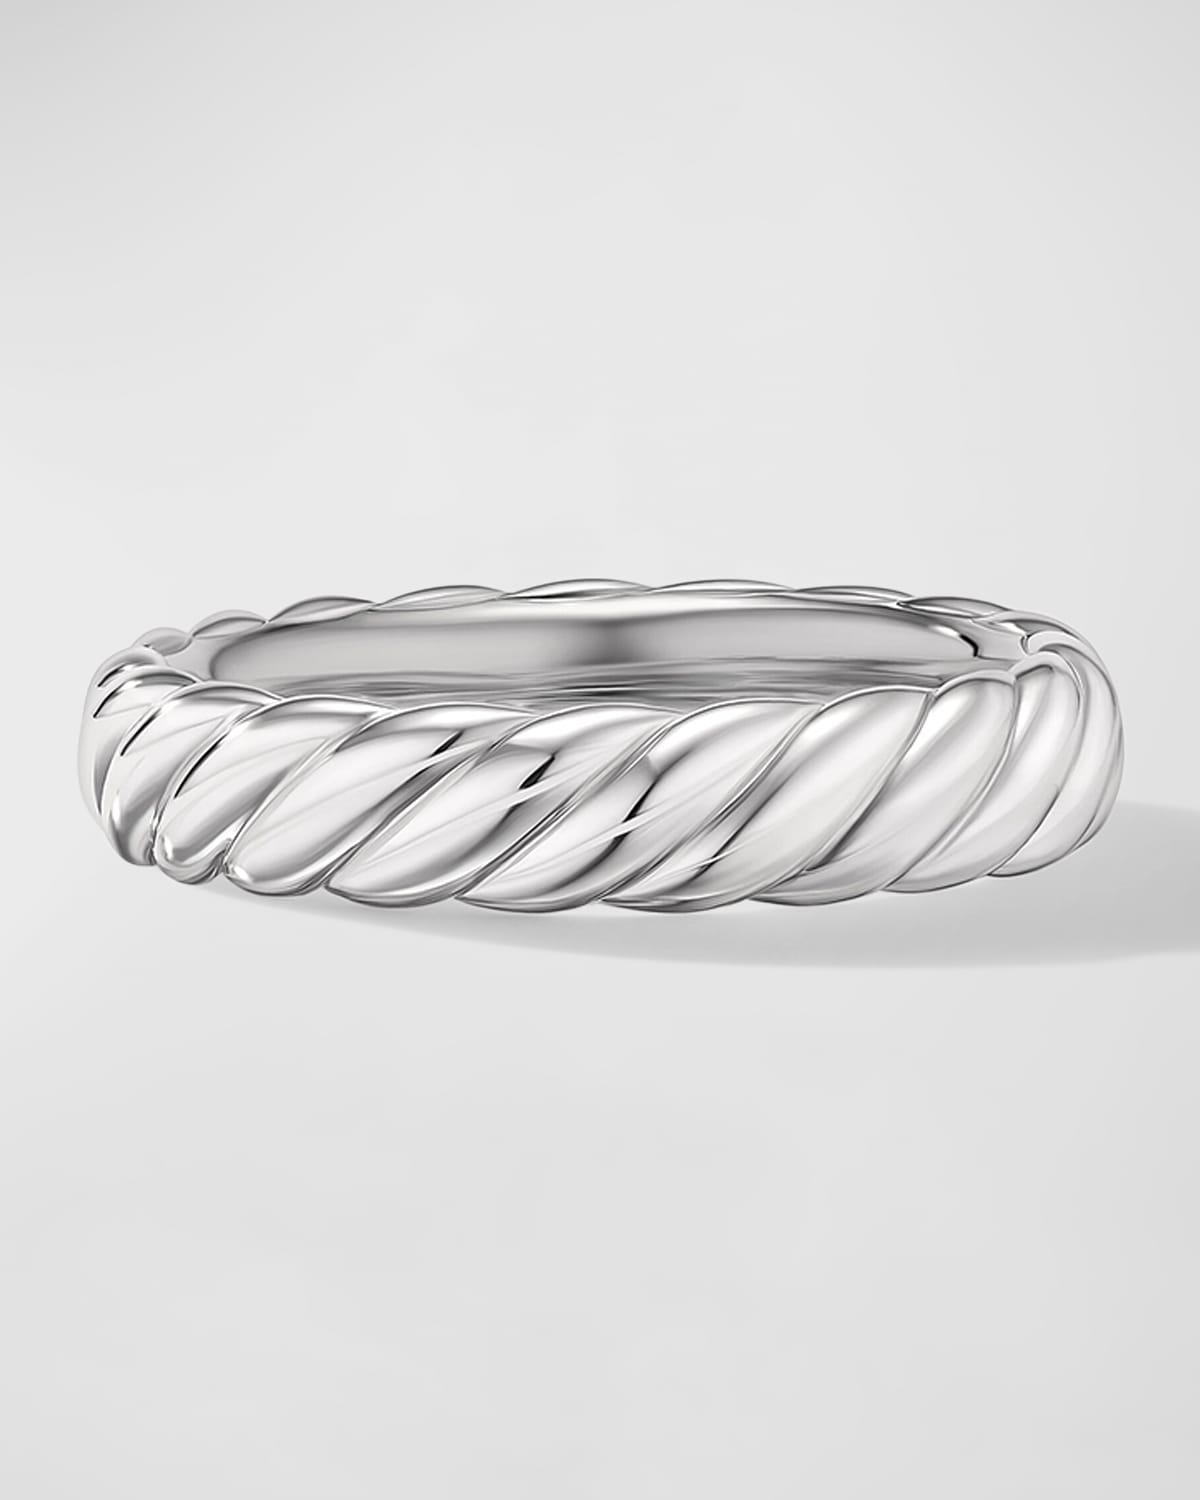 David Yurman Sculpted Cable Band Ring in 18K White Gold, 4.5mm, Size 7